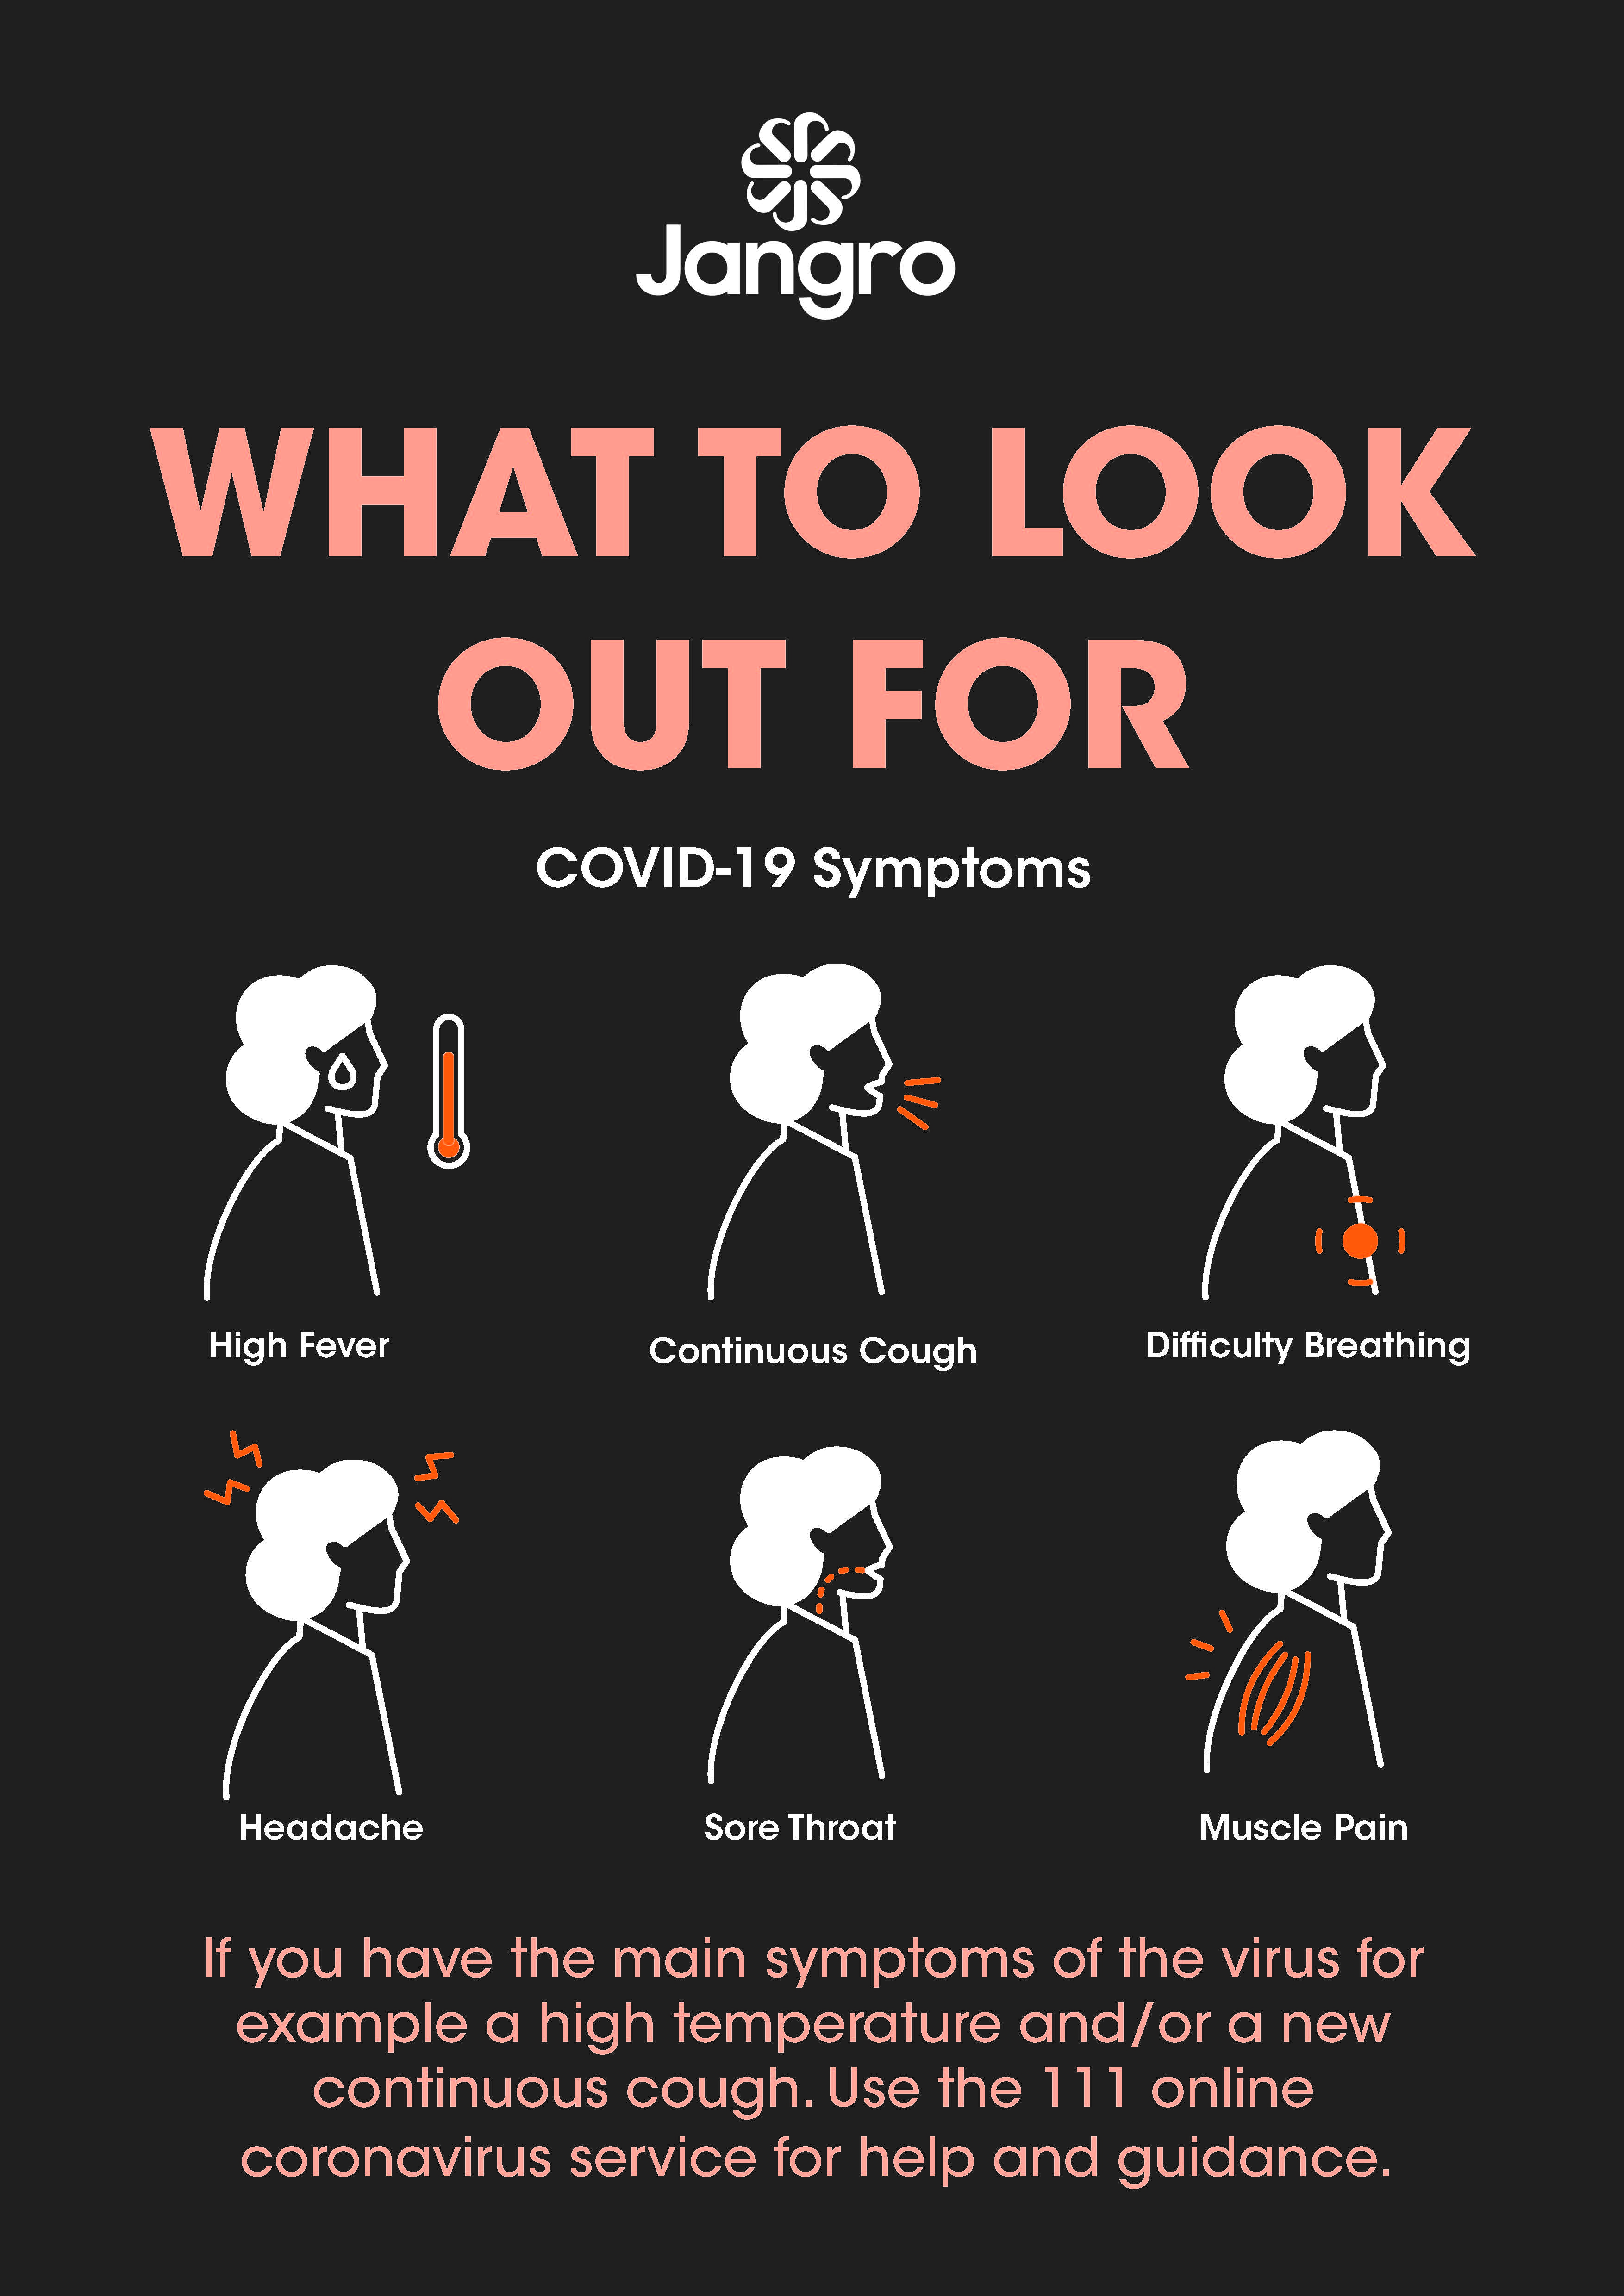 COVID-19 Symptoms & What To Look Out For